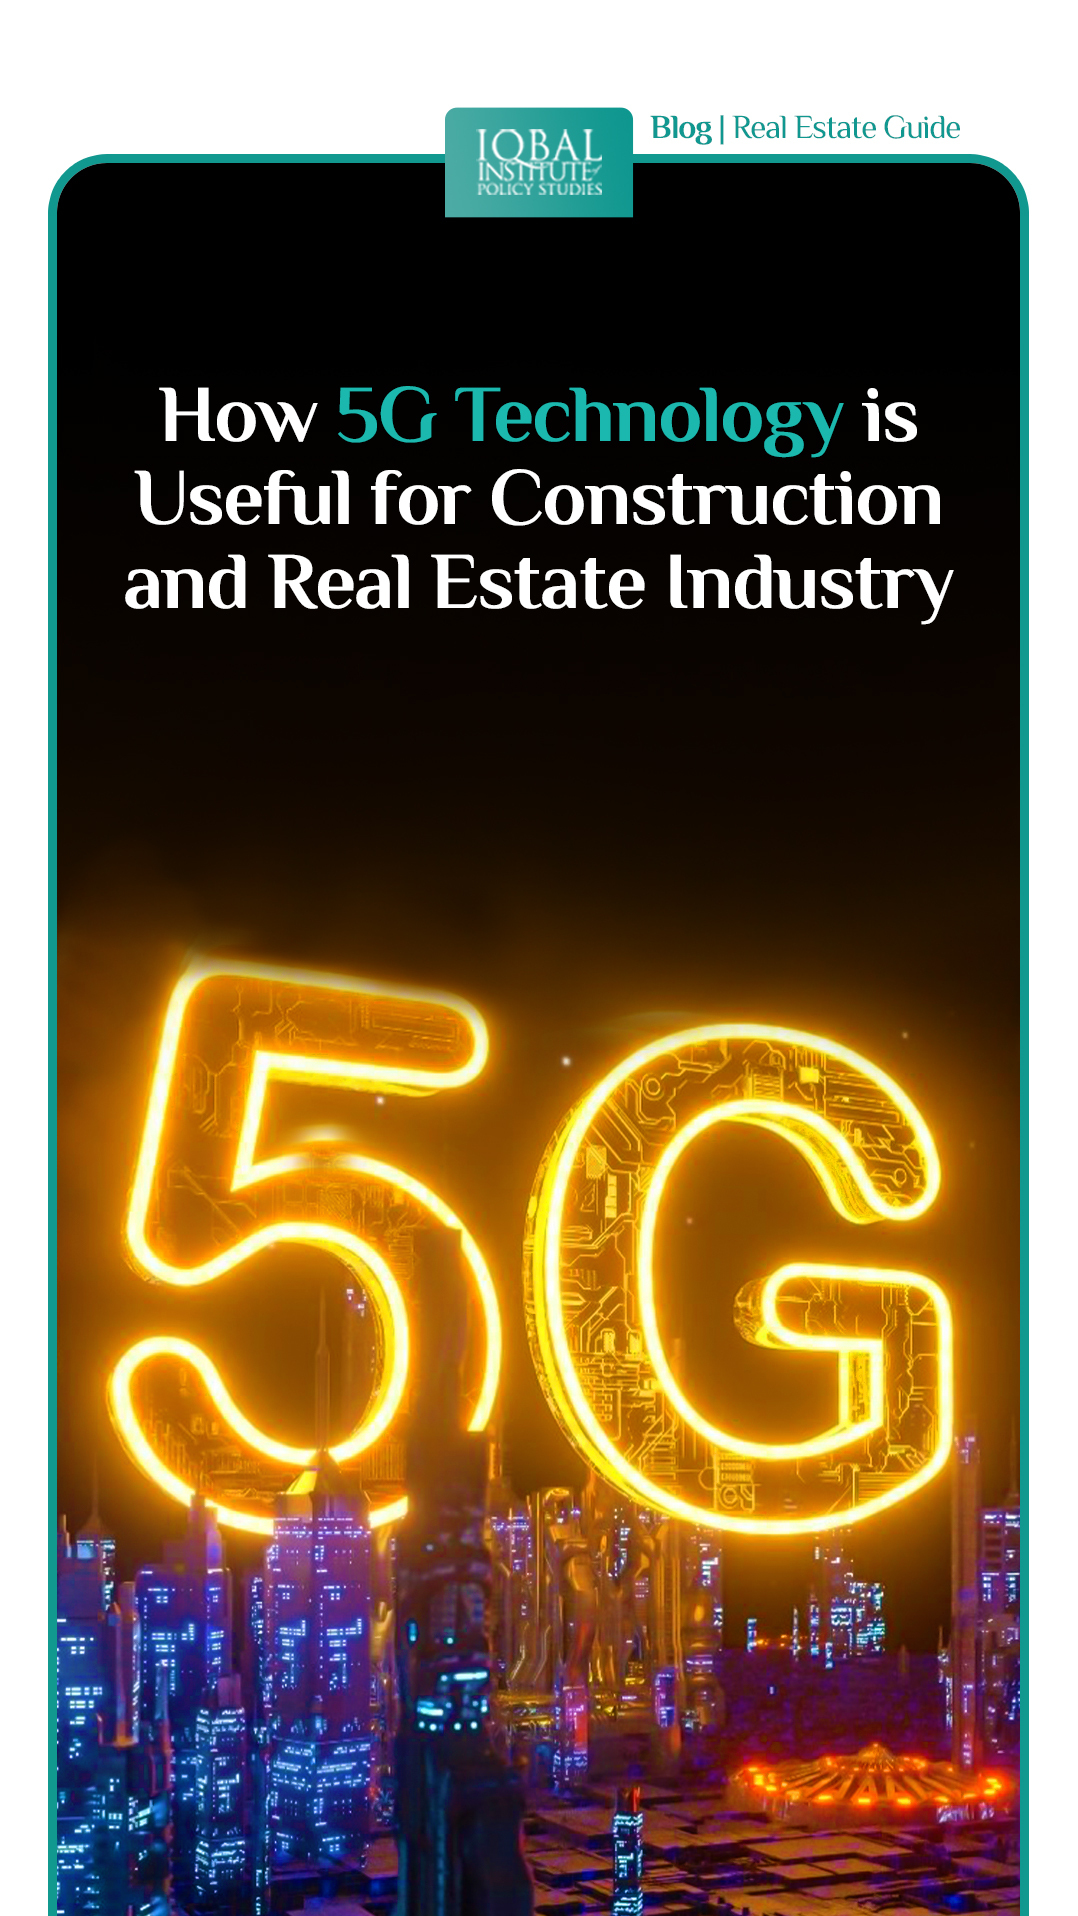 How 5G technology is useful for construction and real estate industry